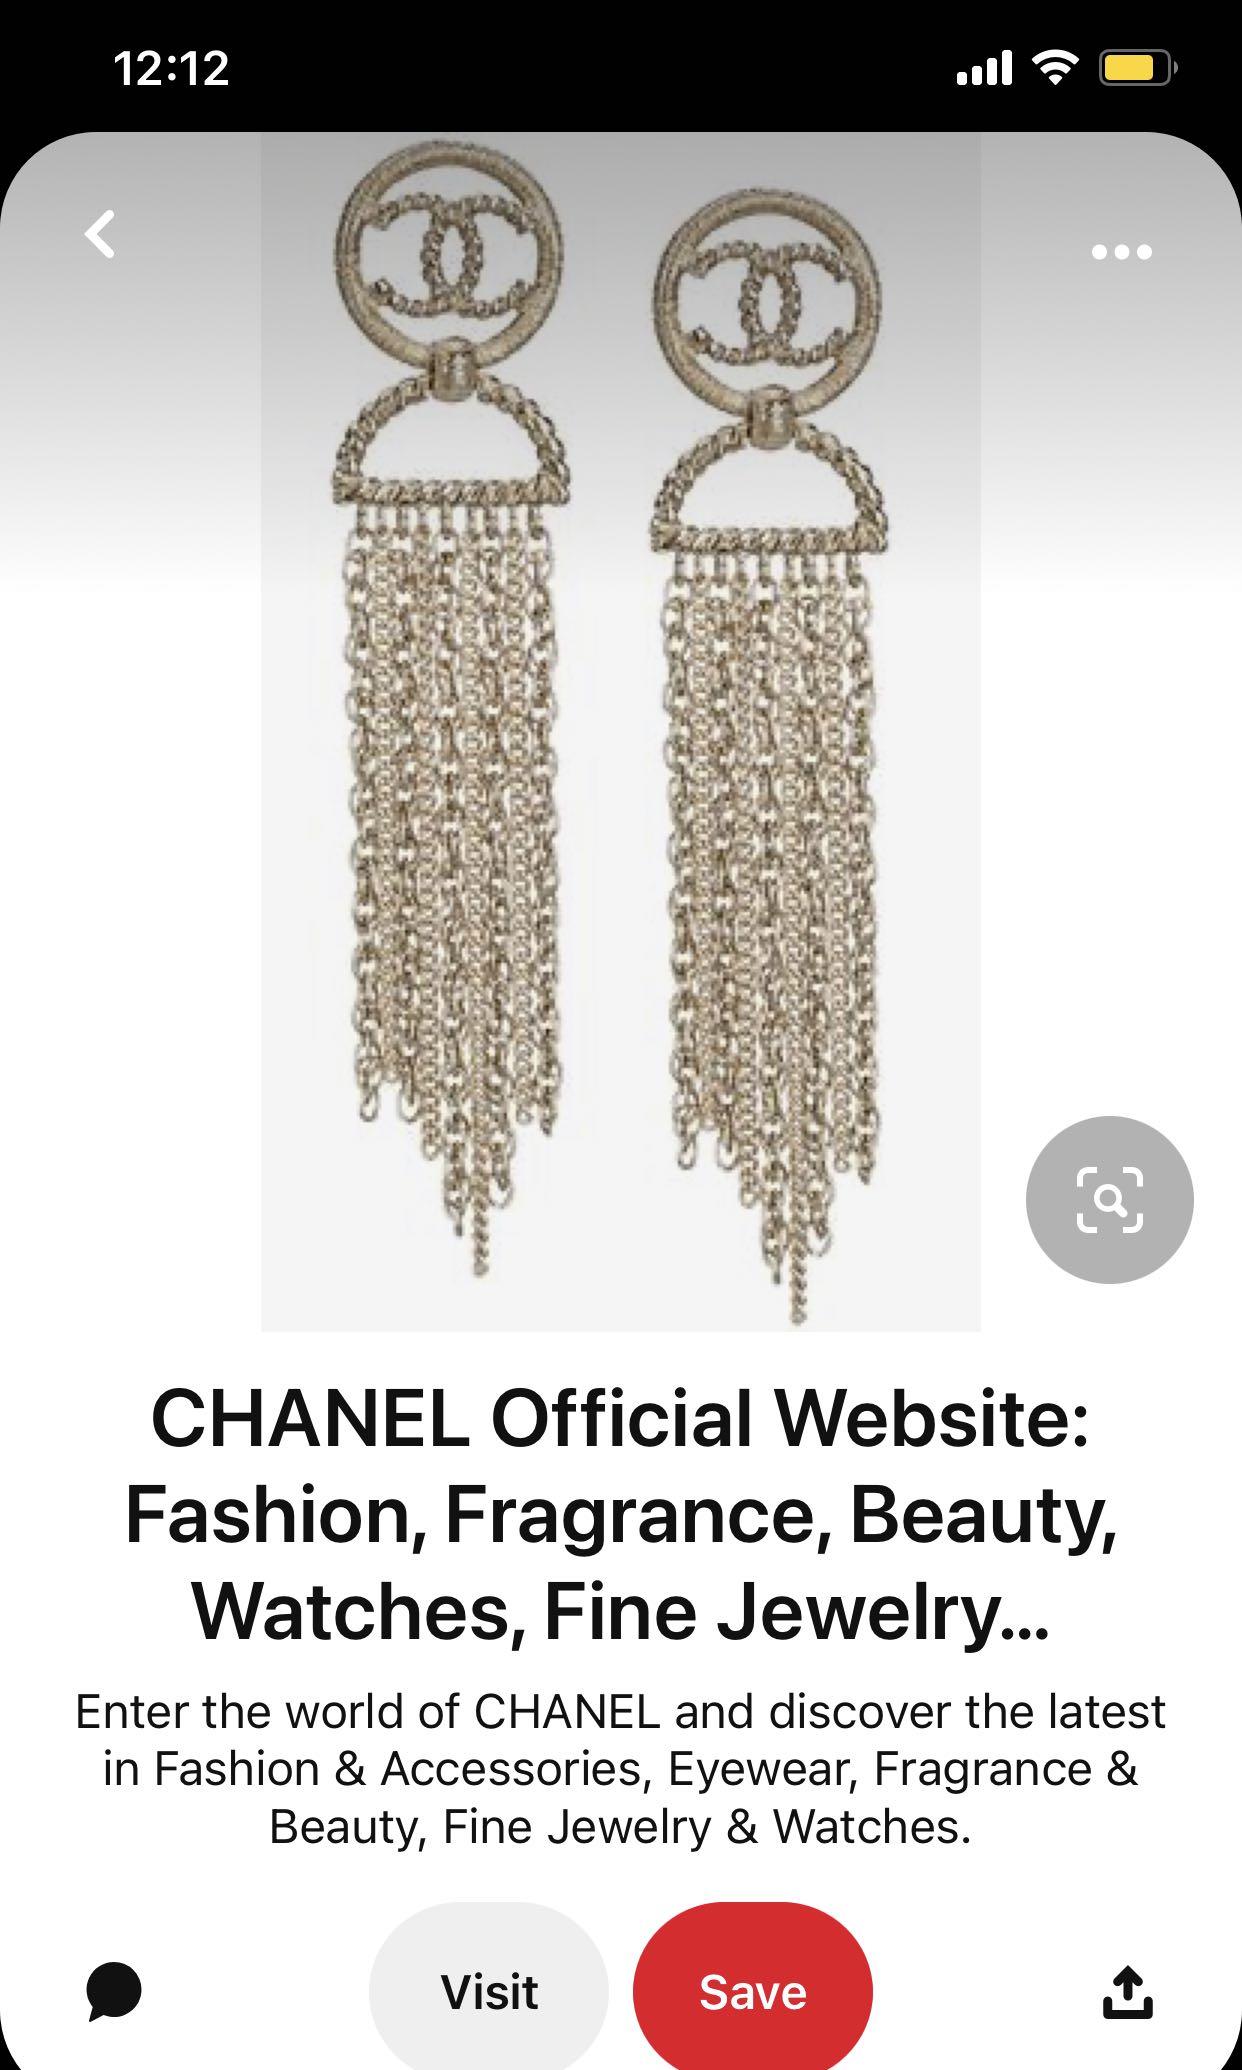 CHANEL Official Website: Fashion, Fragrance, Beauty, Watches, Fine